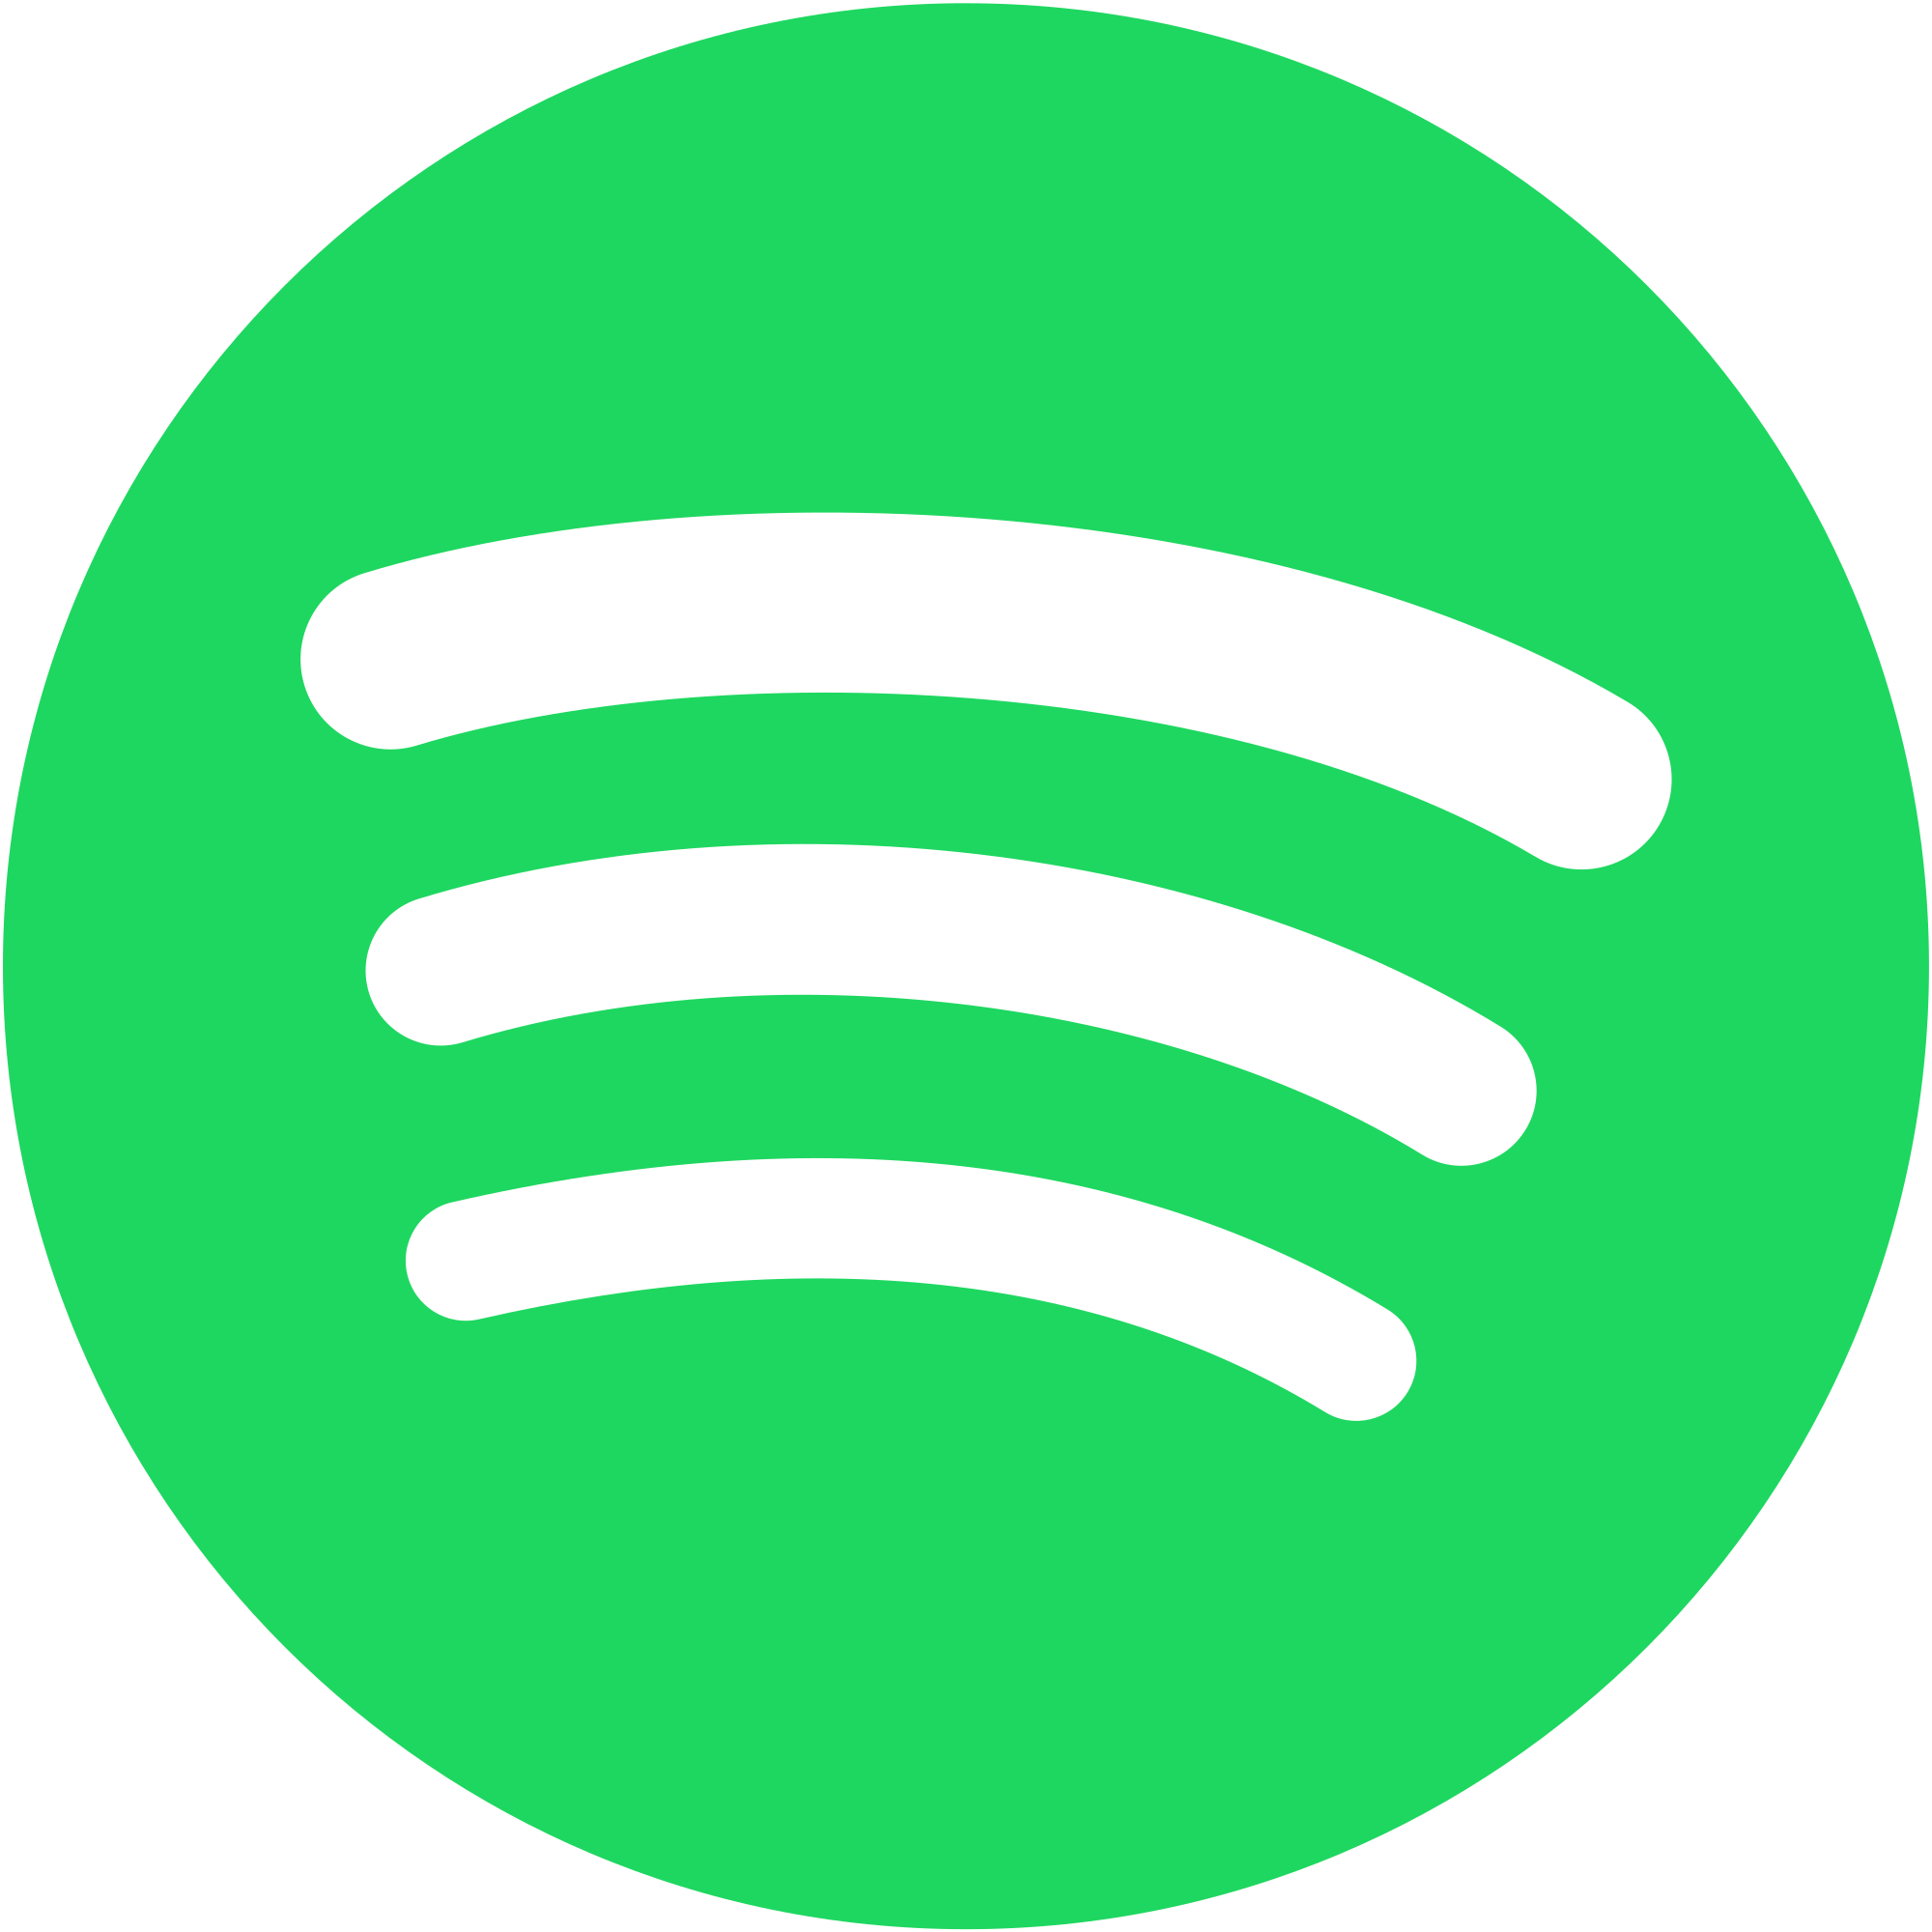 Listen to Spark Music NZ on Spotify